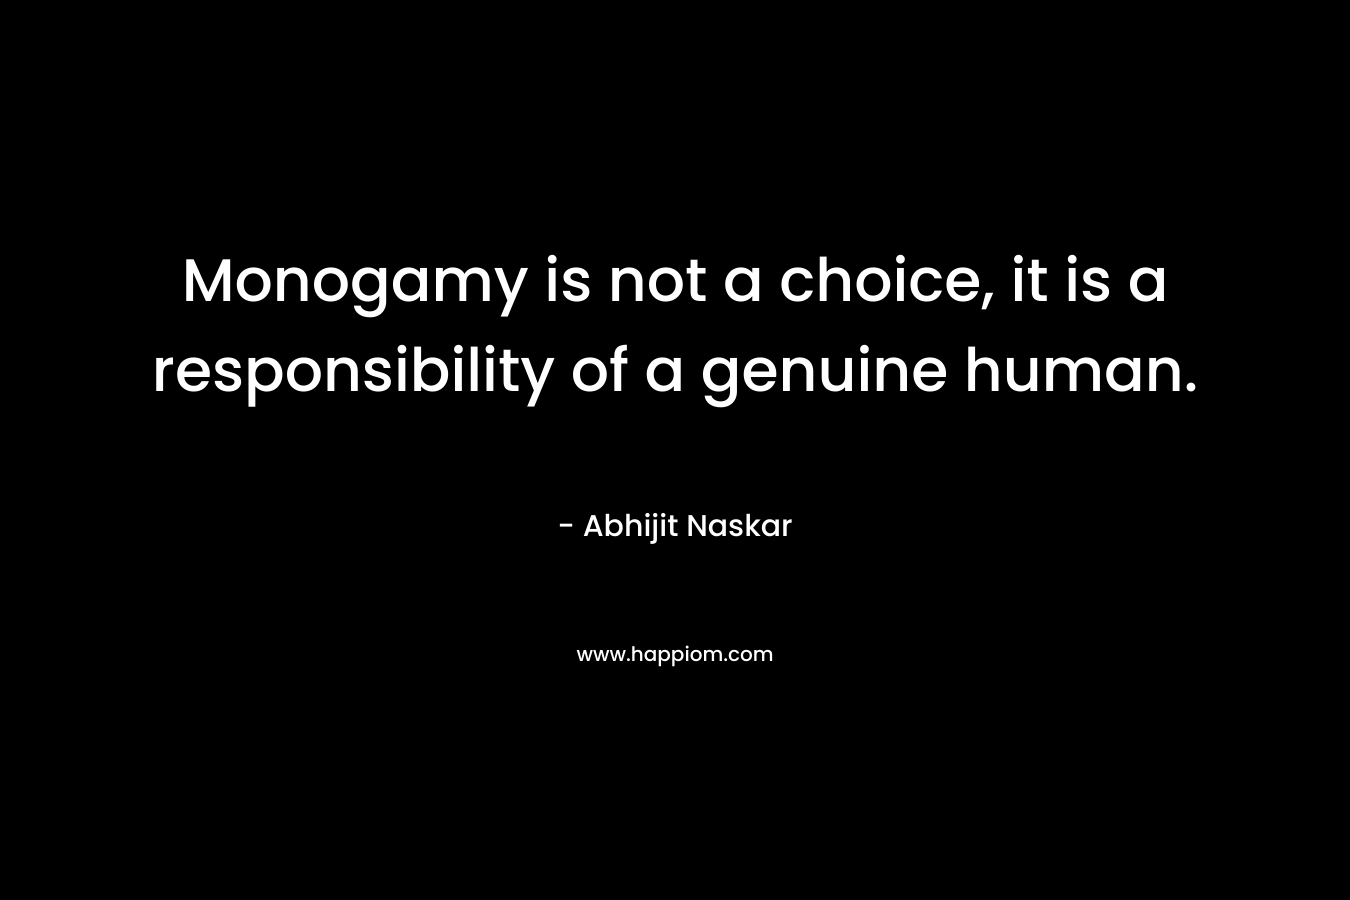 Monogamy is not a choice, it is a responsibility of a genuine human.